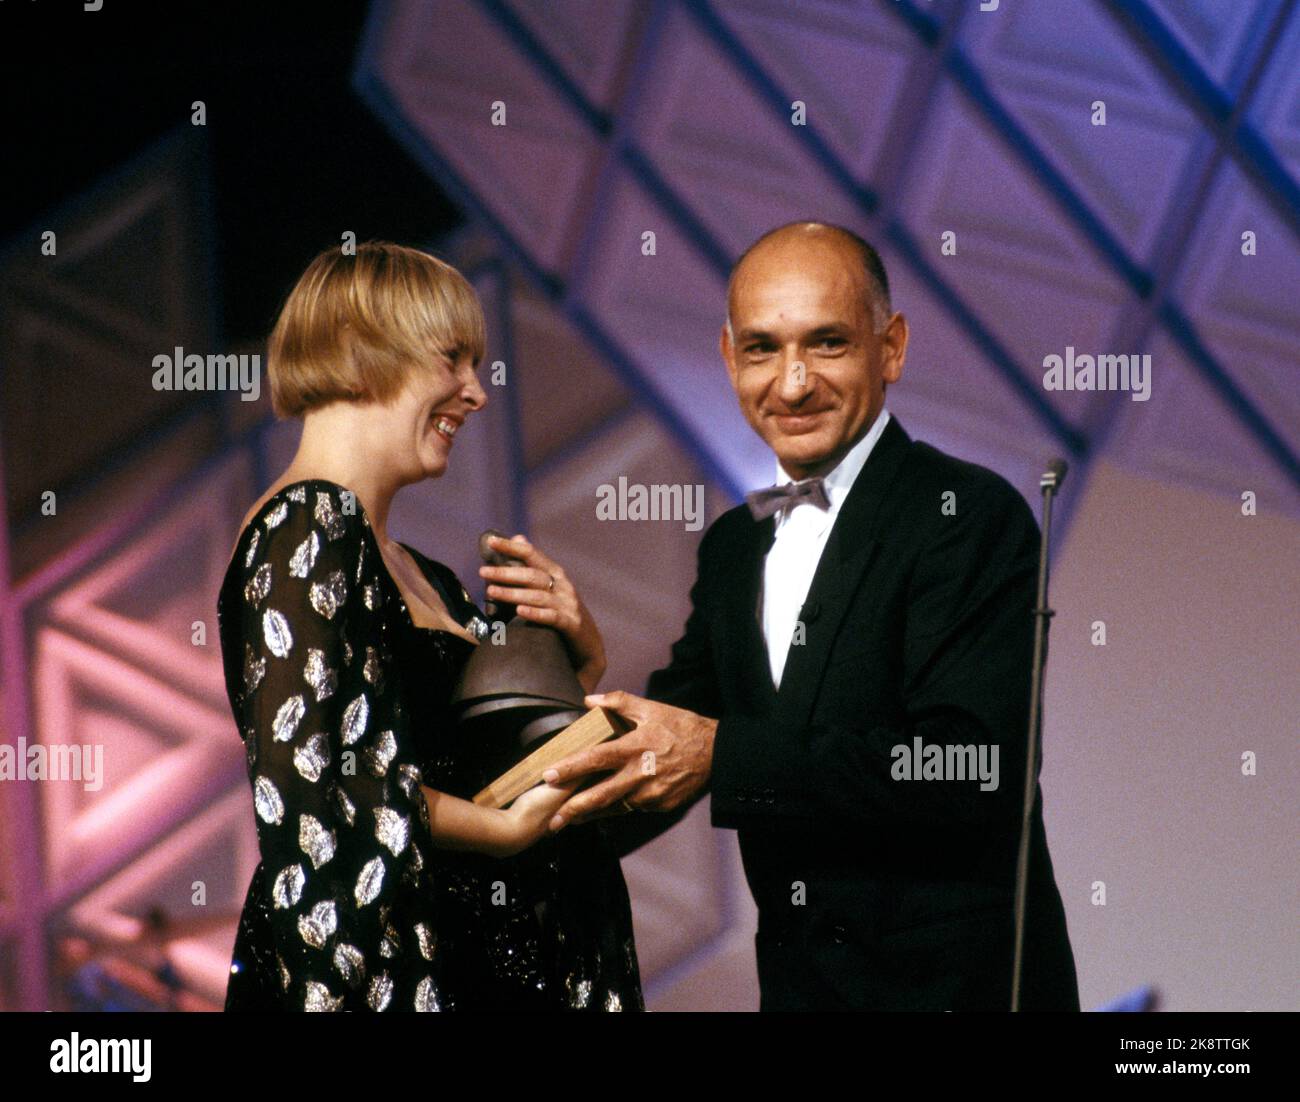 Haugesund 198808. Anne Krigsvoll was awarded the Amanda Prize as the best Norwegian female actor for the lead role in television production 'by moonlight it does not grow' (after Torborg Nedreaas' book) during the Film Festival in Haugesund. It was Ben Kingsley who handed the award. Photo Morten Hvaal / NTB / NTB Stock Photo